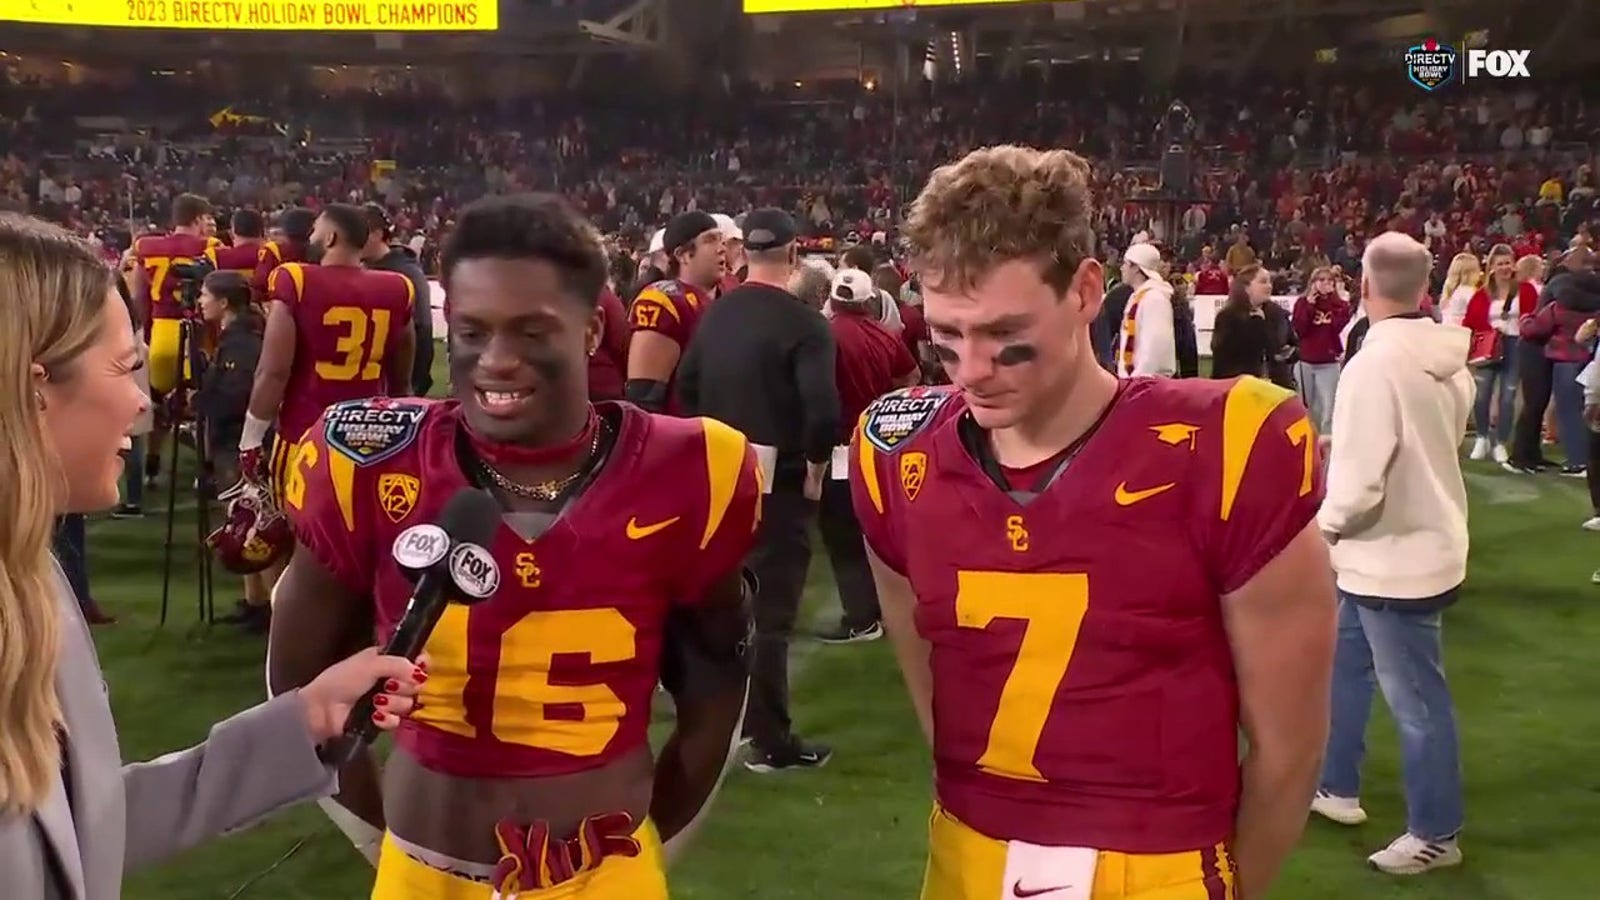 'I'm trying to pinch myself right now' — USC's Miller Moss